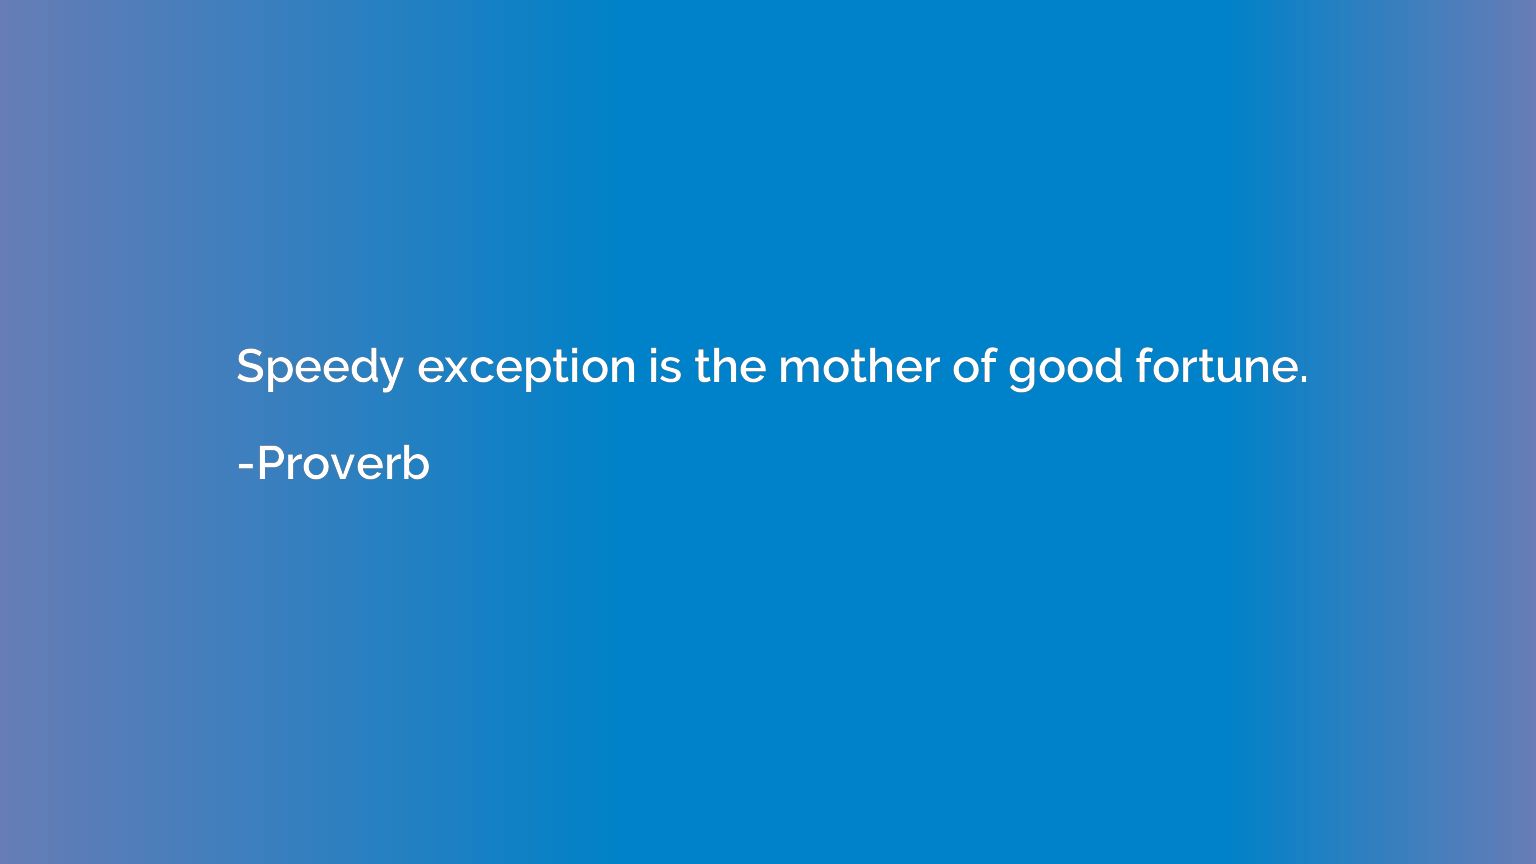 Speedy exception is the mother of good fortune.